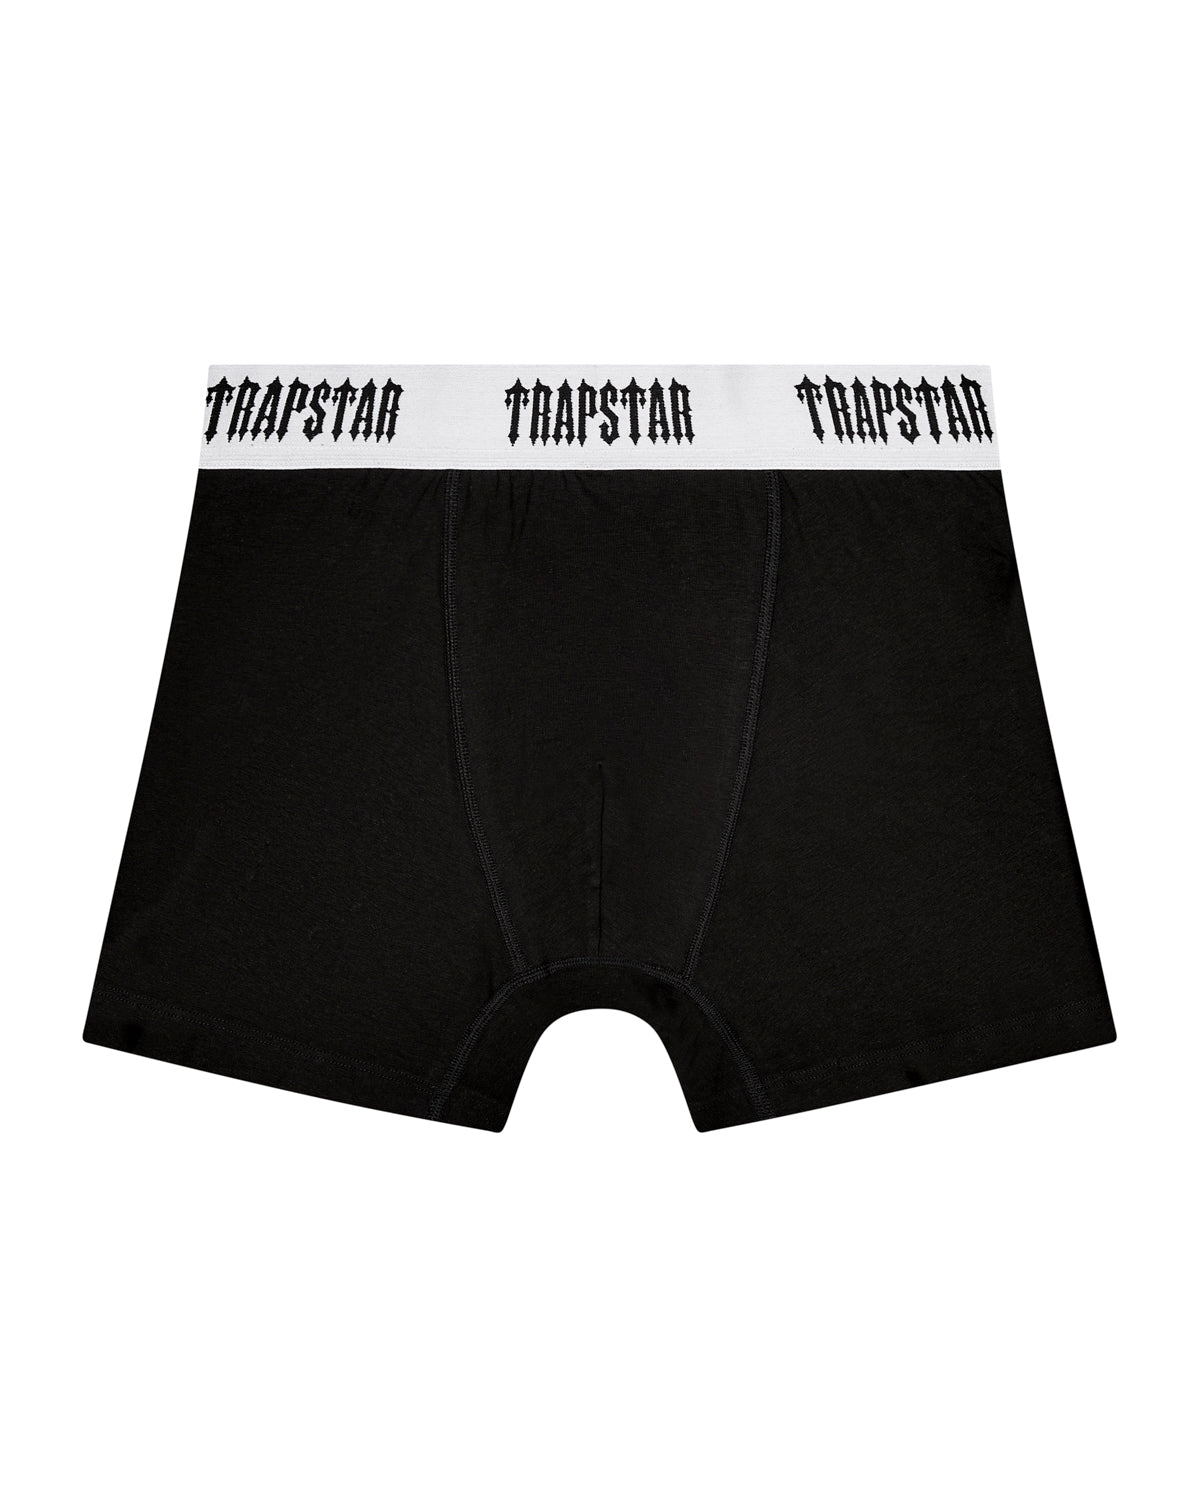 3 Pack Boxer Short - Black with White Waistband